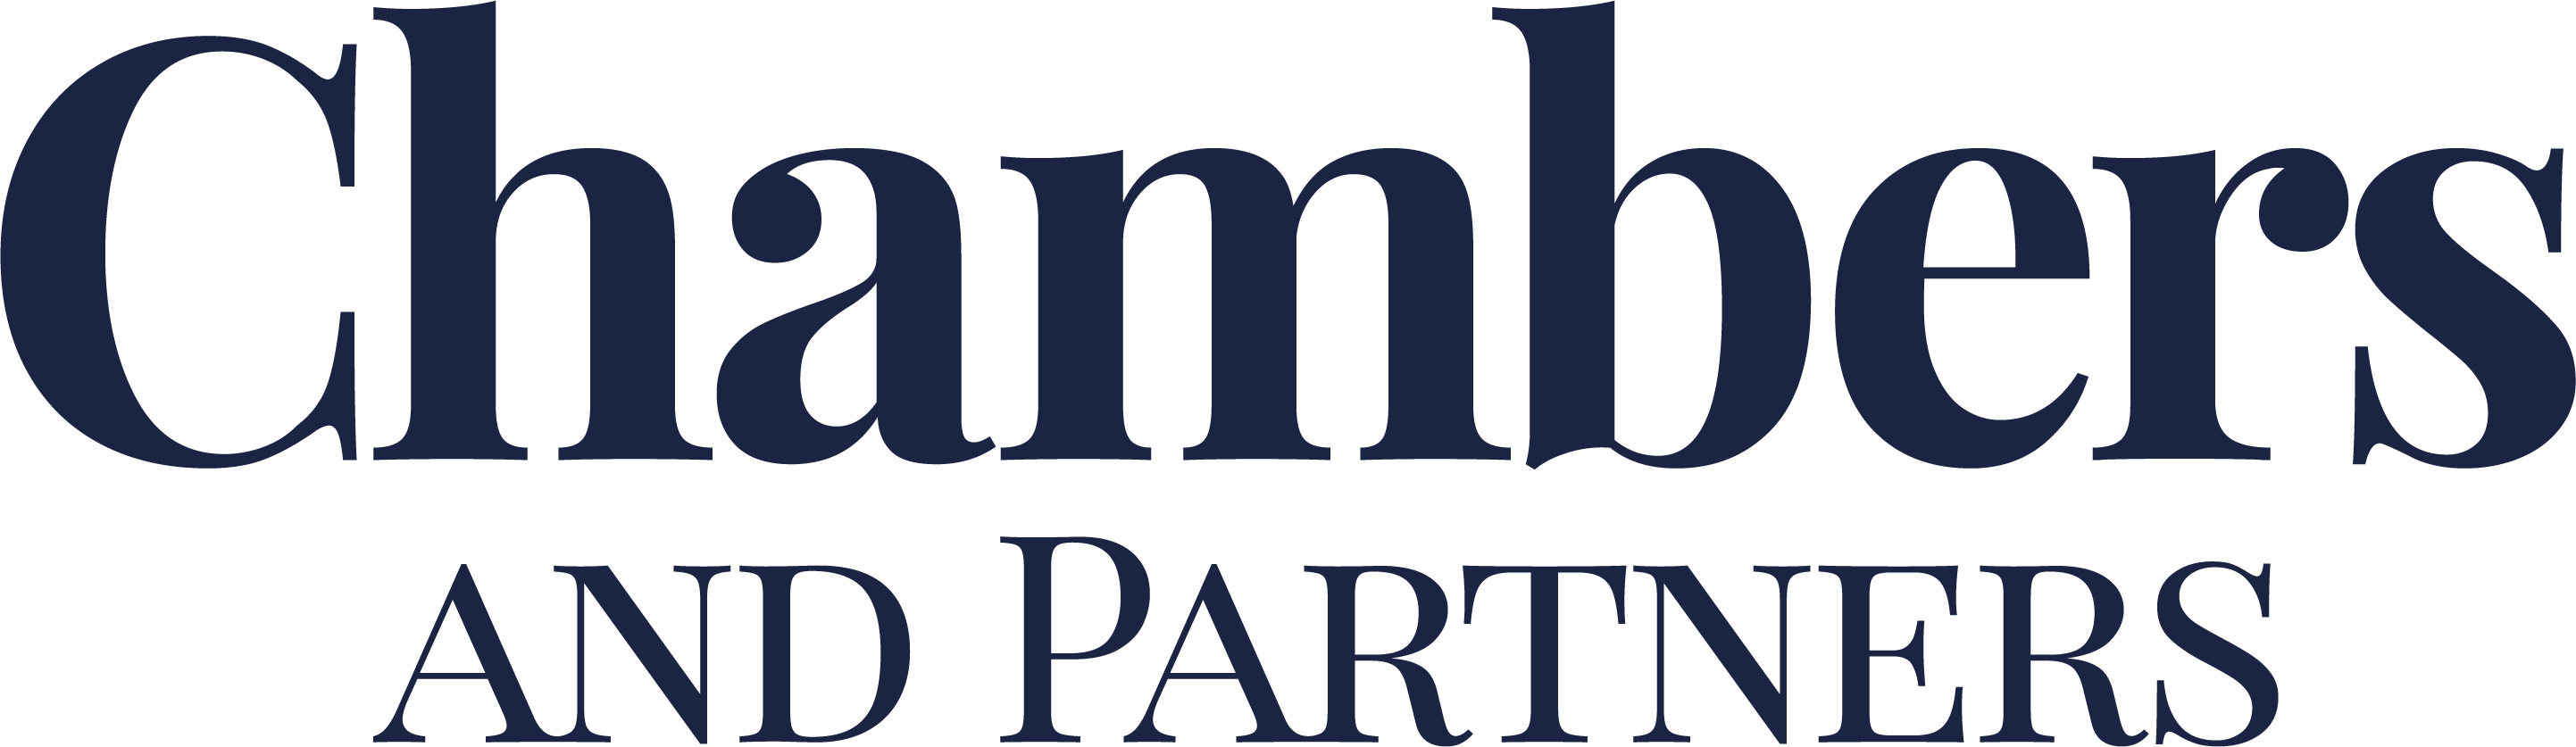 Chambers And Partners logo